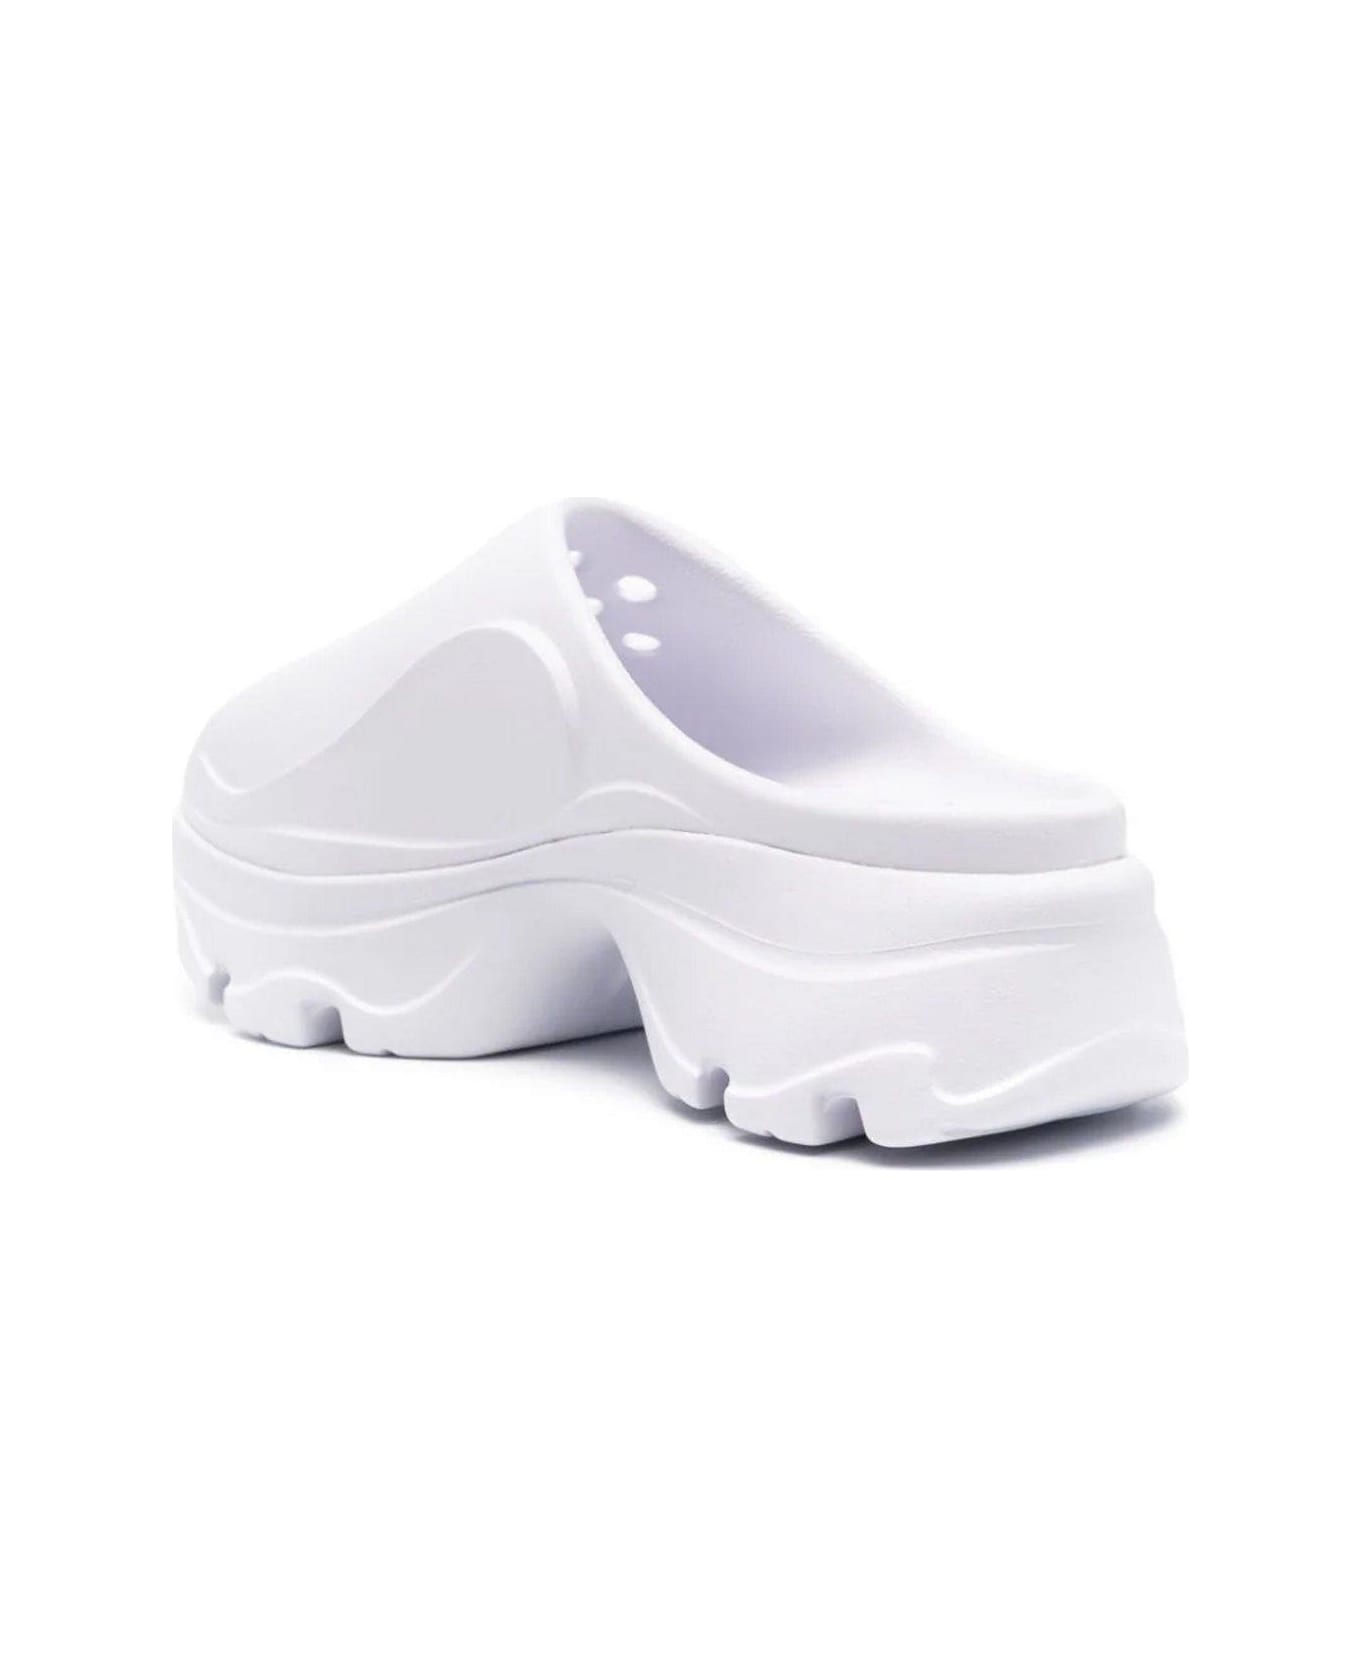 Adidas by Stella McCartney Cut-out Detailed Slip-on Clogs - WHITE